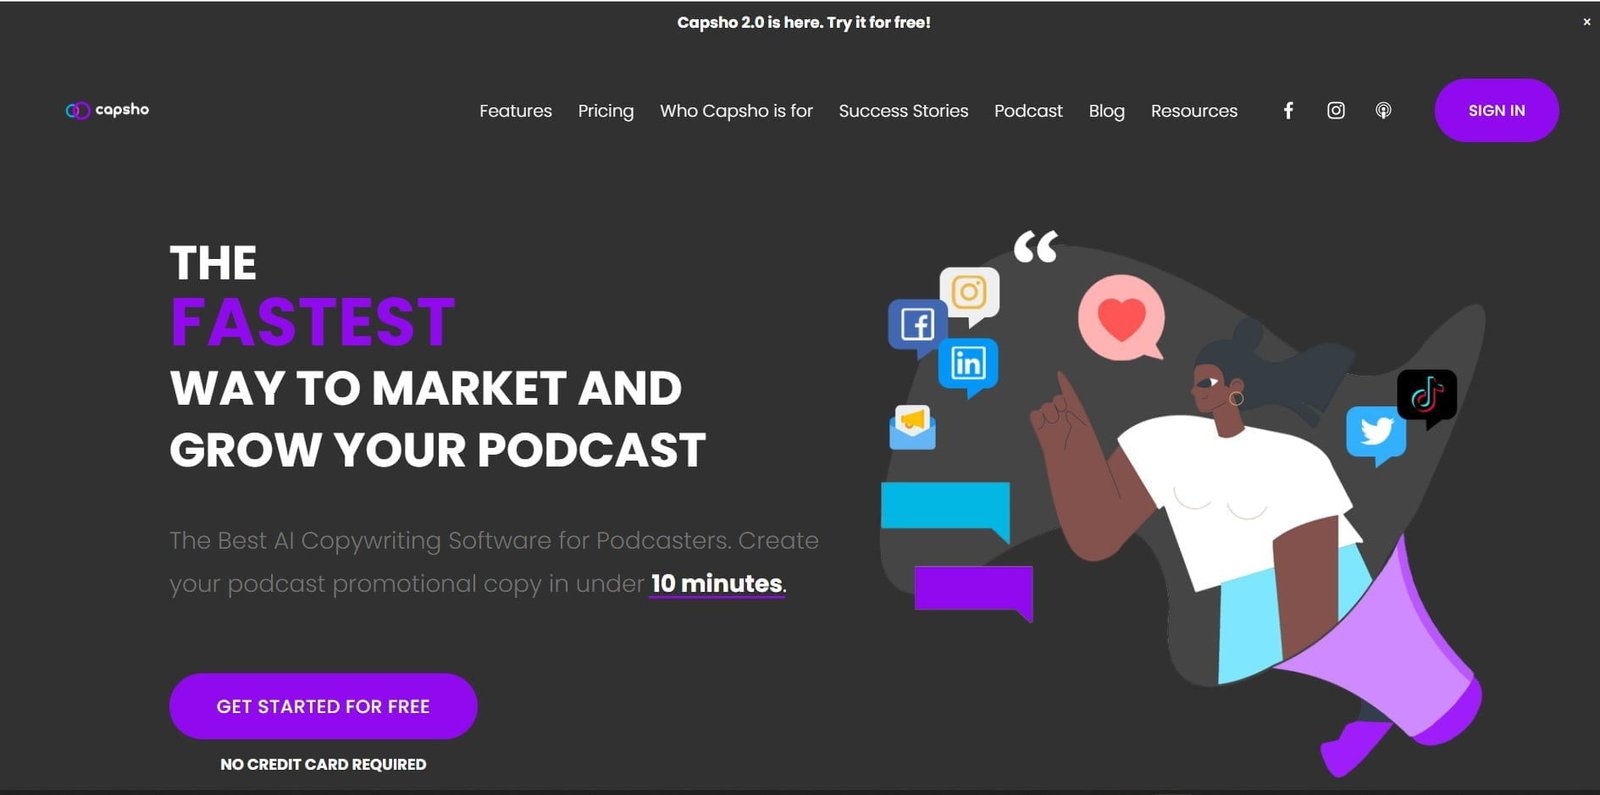 Capsho is an AI copywriting tool that helps podcasters create engaging and SEO-optimized content for promoting their podcasts across various platforms.